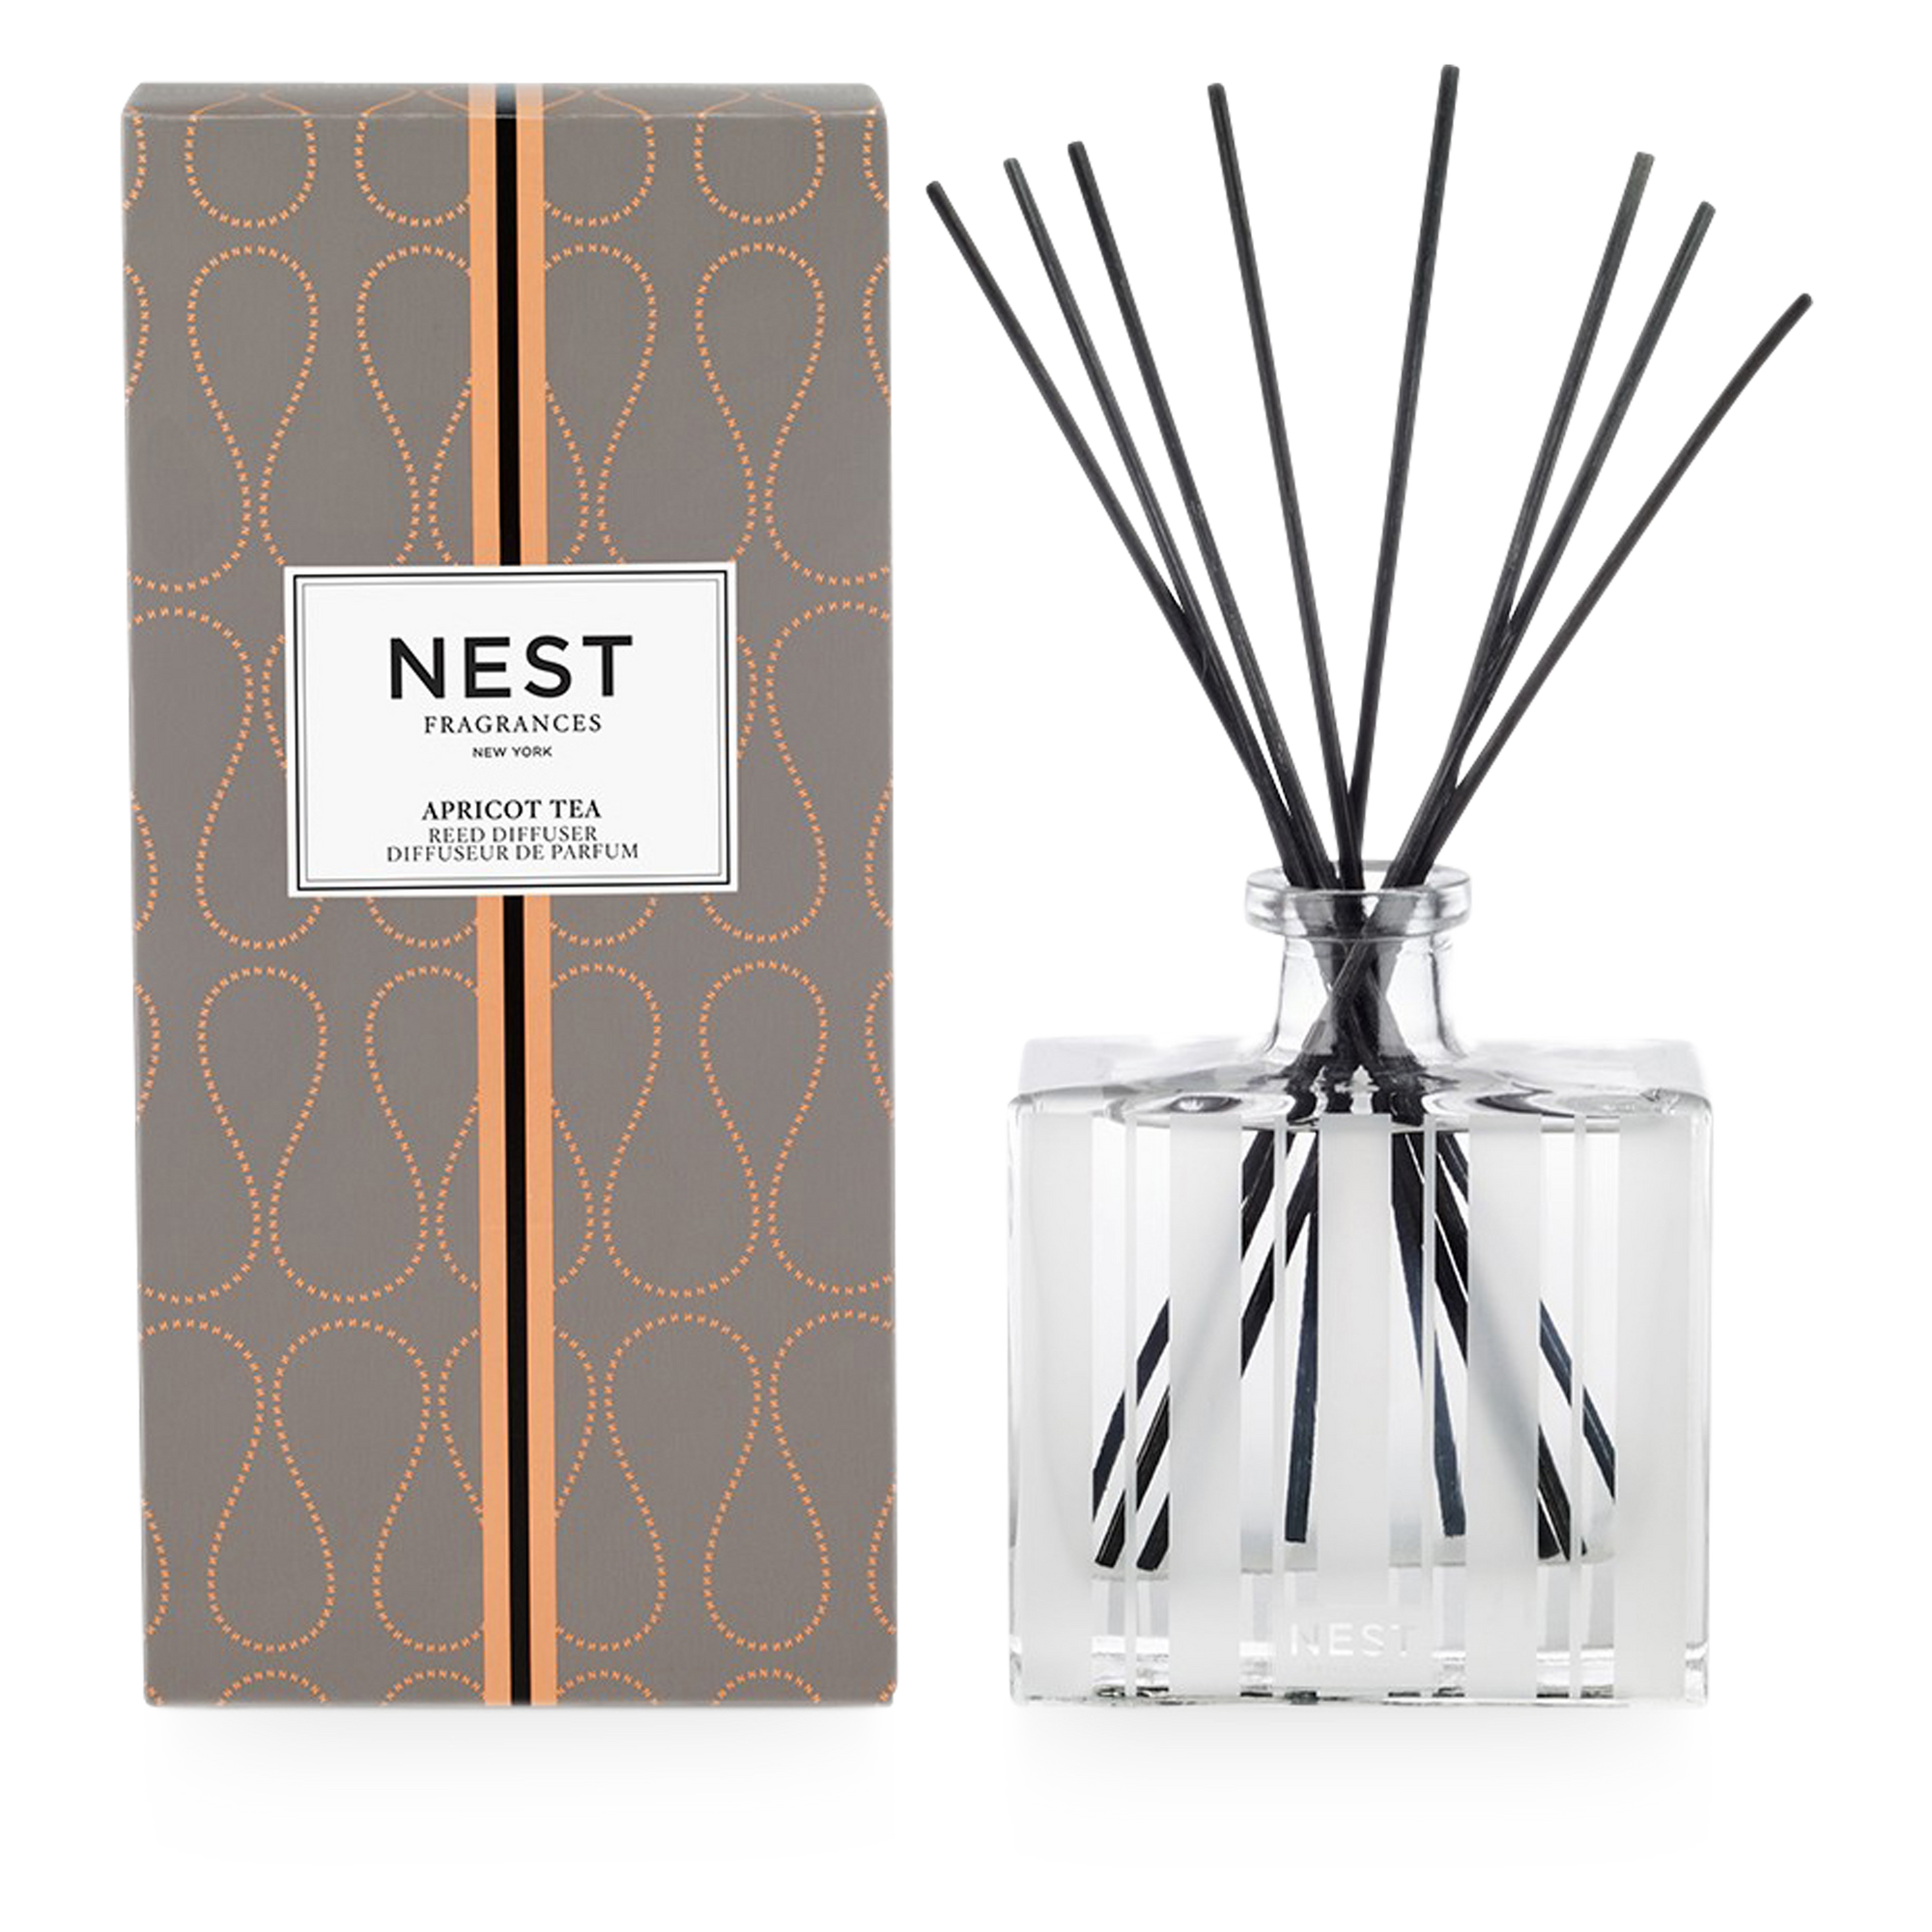 NEST New York's home, perfume, and body care collections transform the everyday through scents that transport, inspire and captivate the senses.